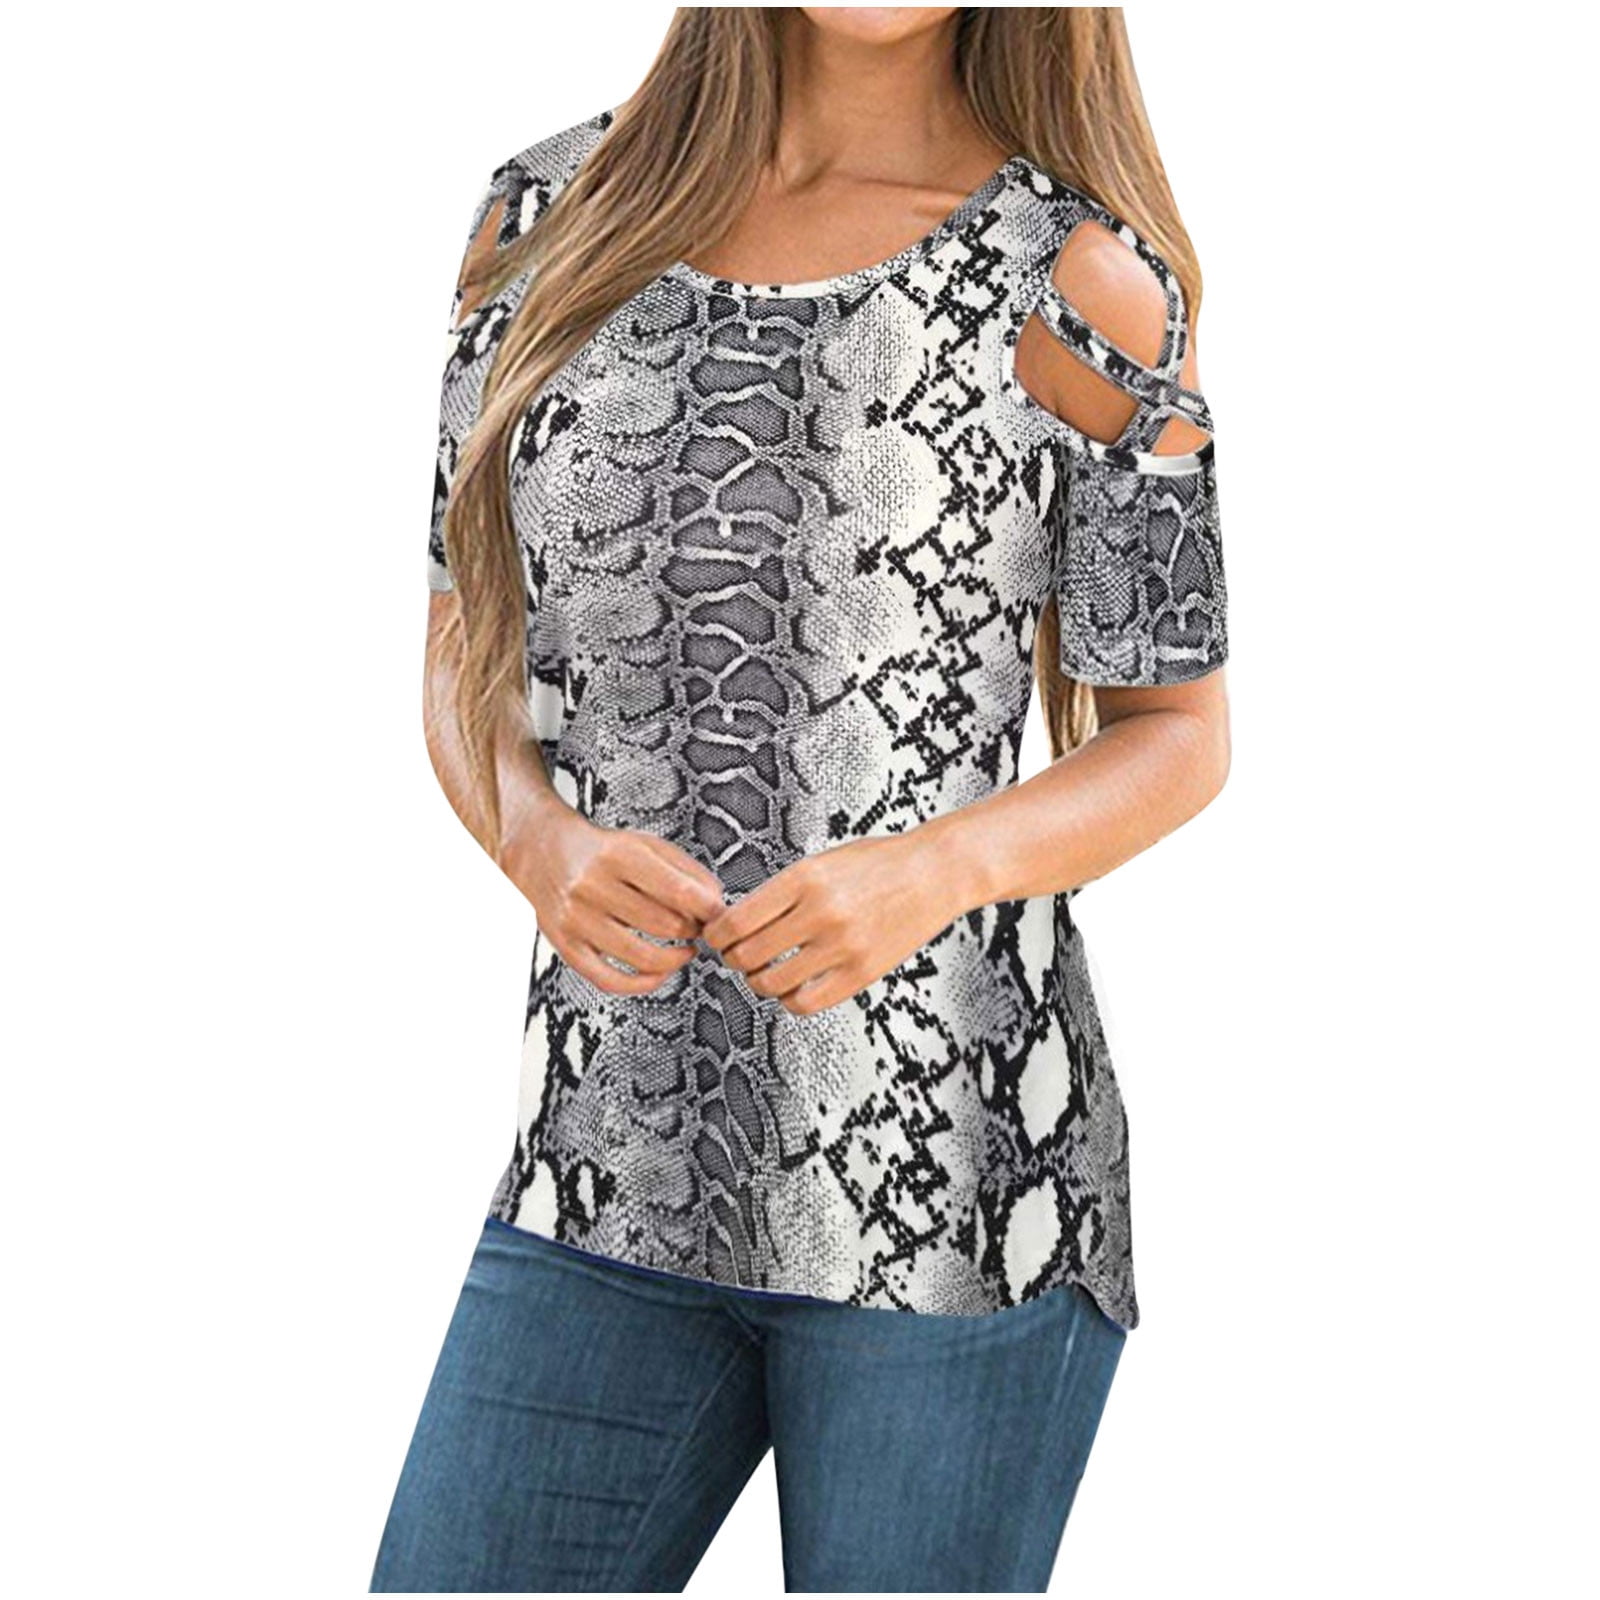 Womens Lace Cold Shoulder Short Sleeves Ladies Tops Blouse Shirt Tunic Tee UK 